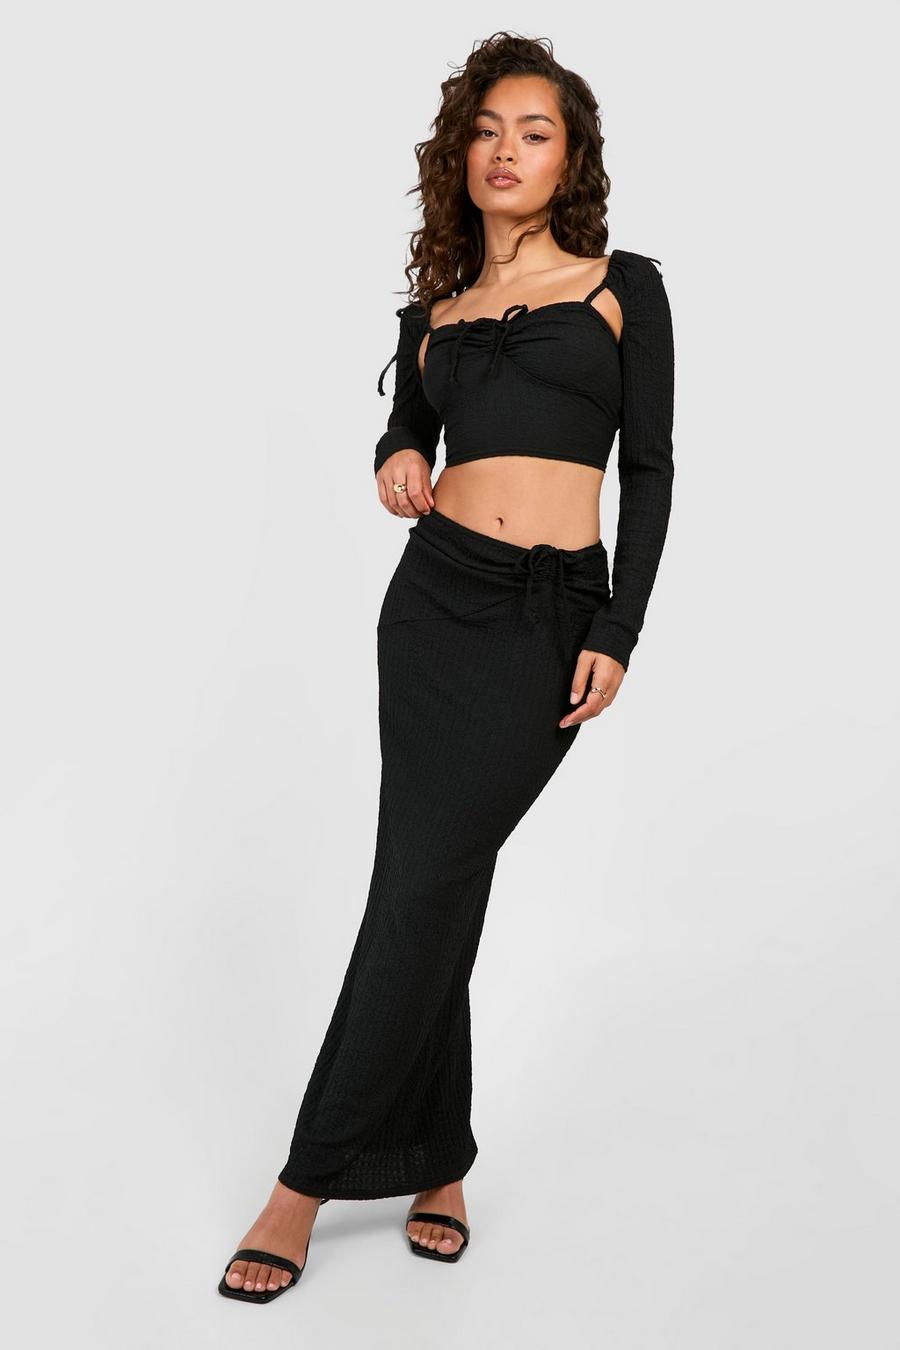 Black Textured Crinkle Ruched Crop & Maxi Skirt